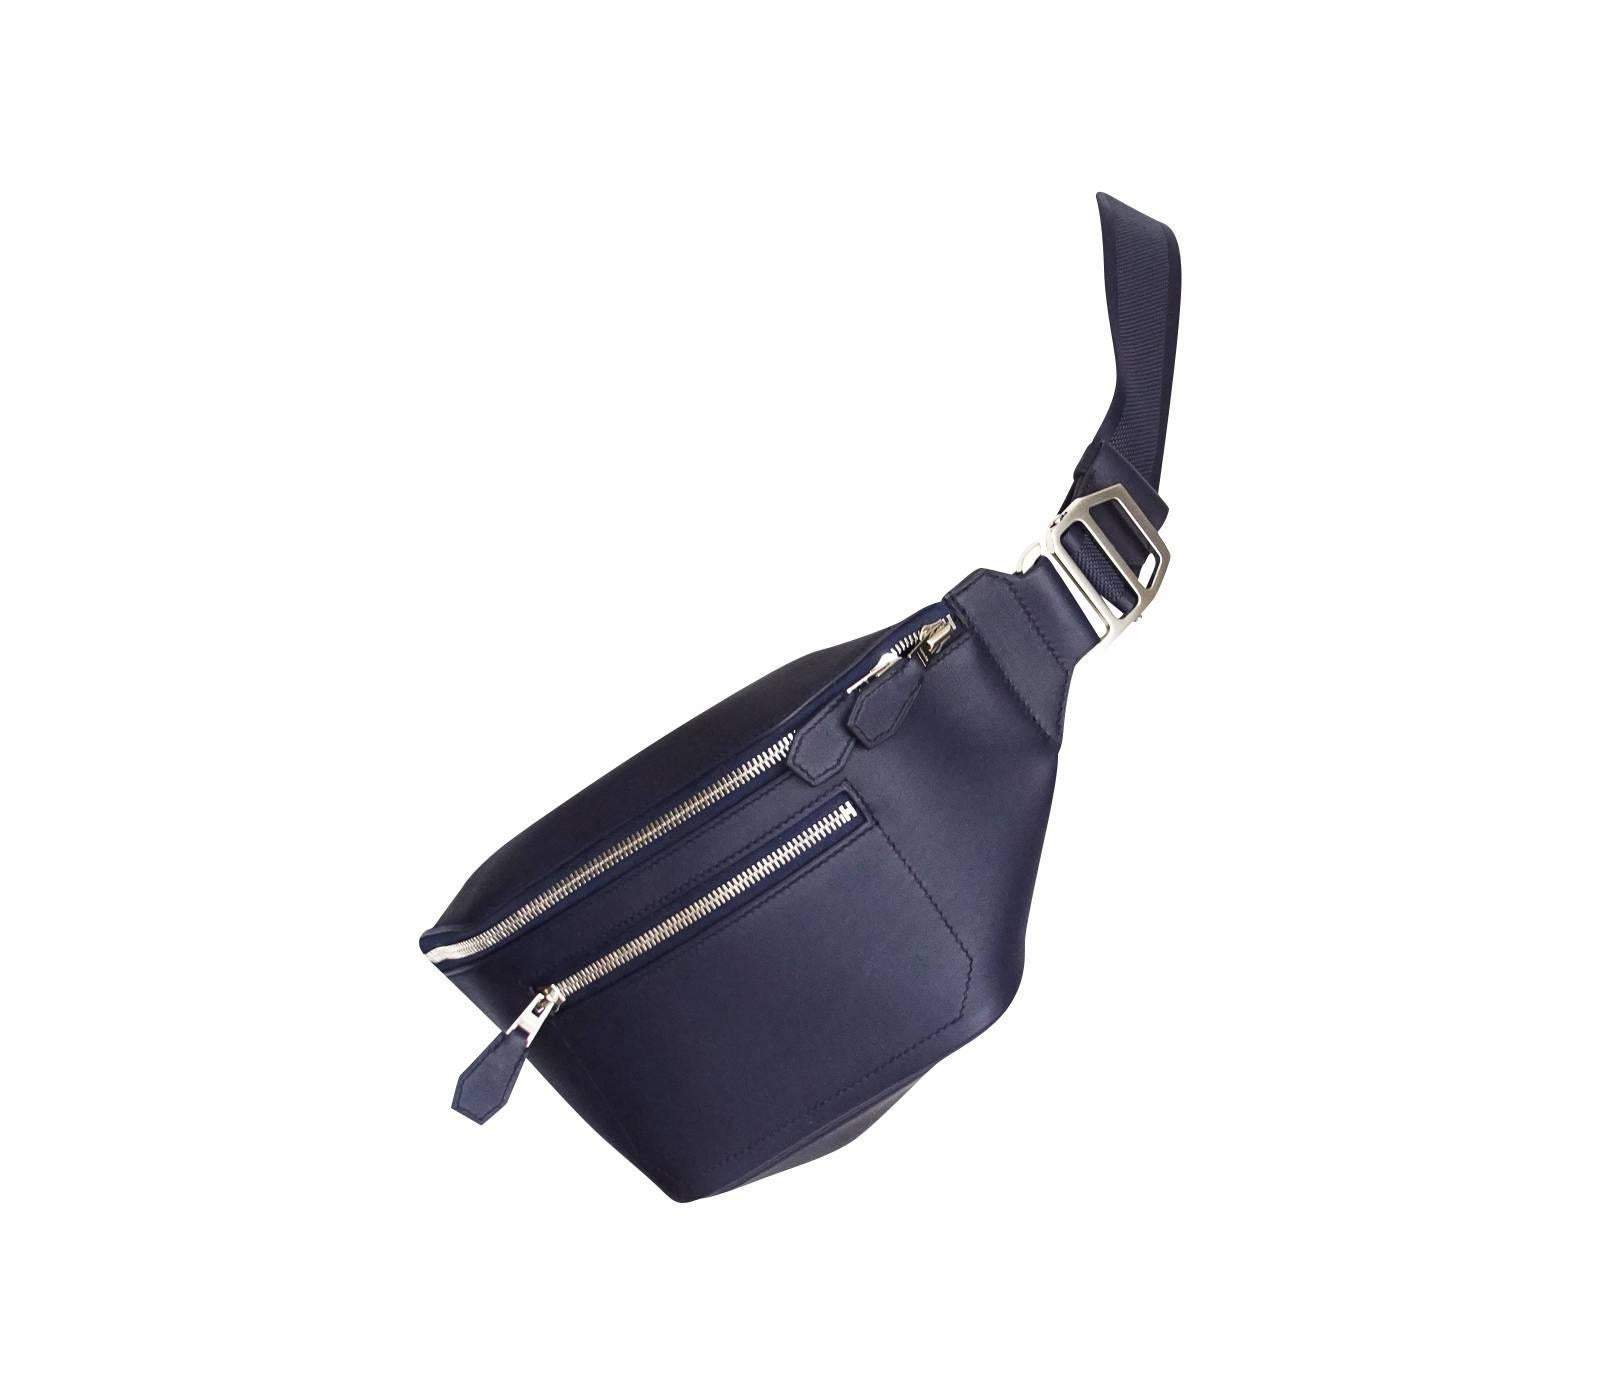 Guaranteed authentic Limitied Edition Hermes Sac Cityslide Cross PM rare Taurillon Cristobal Leather with Sangle Twill strap.
Versatile waist bag in Blue Indigo.
Adjustable strap allows the bag to be worn cross body or around waist.
Comes with